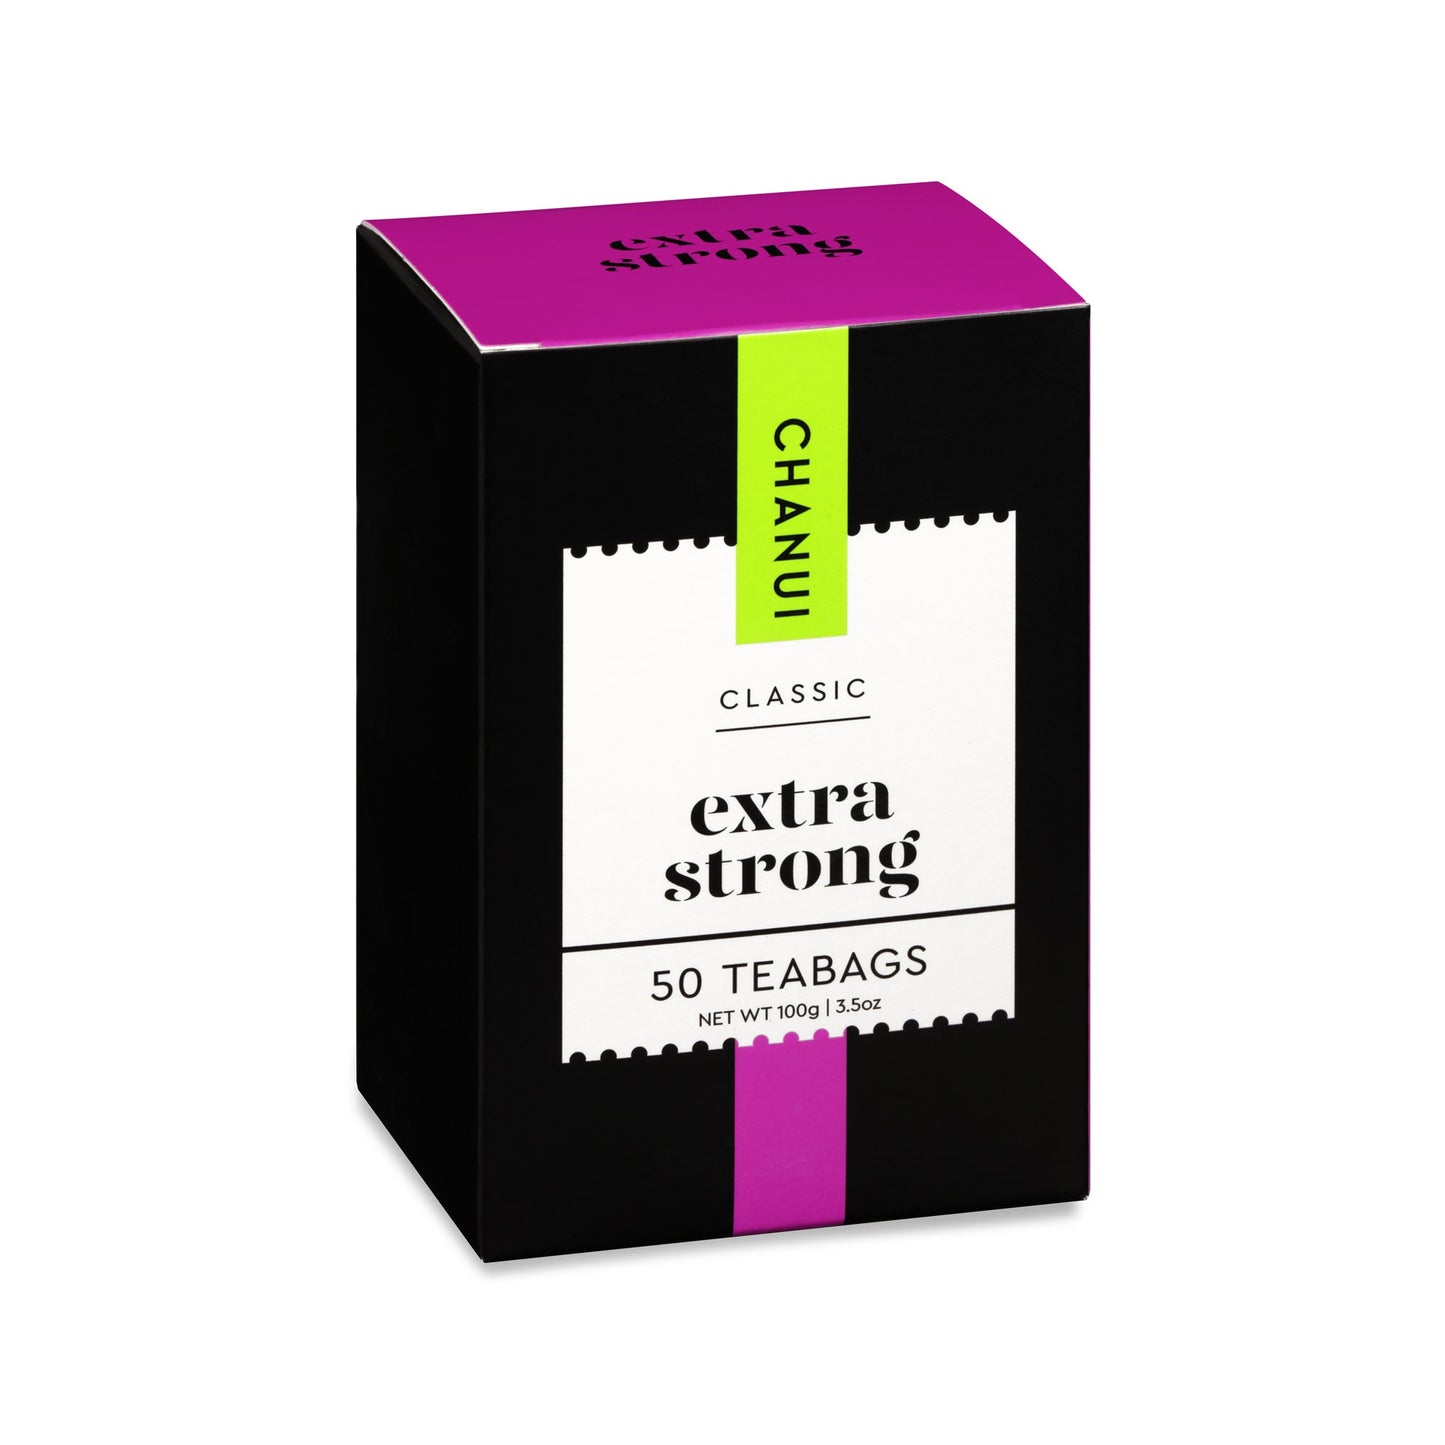 Purple and Black box of Chanui Extra Strong 50 Teabags